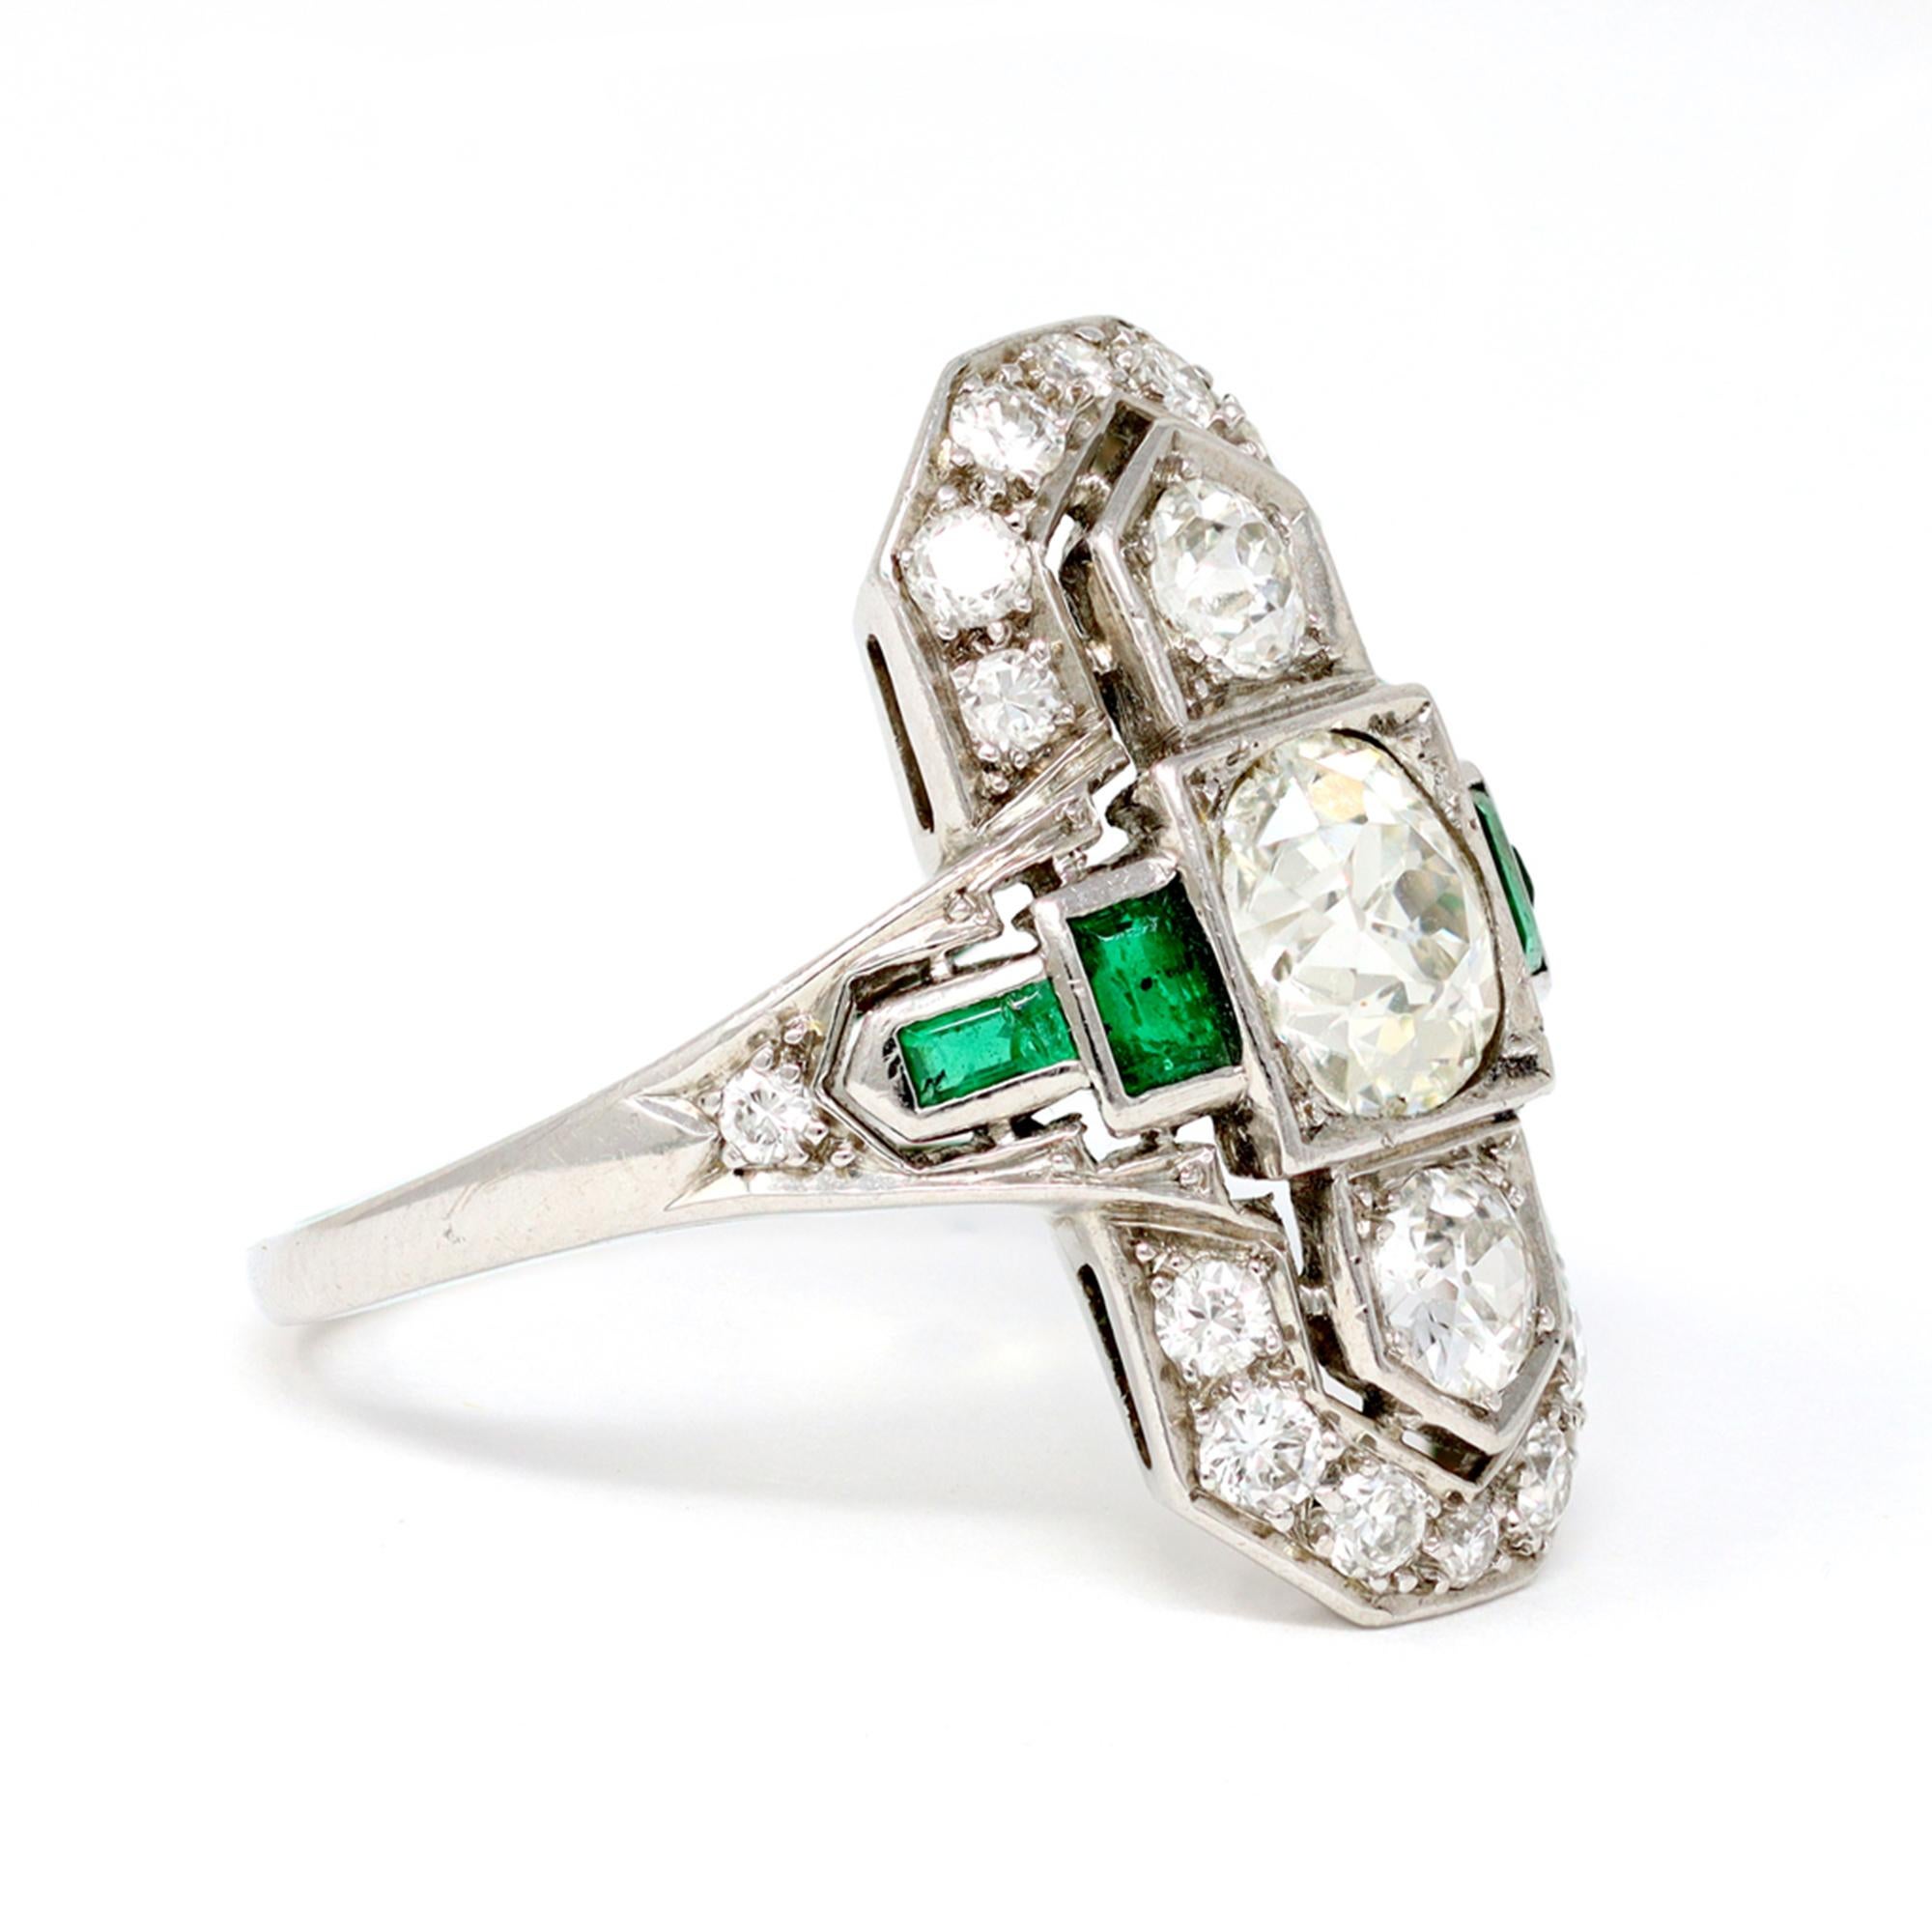 The Art Deco three stone diamond ring is set in platinum with diamonds and emeralds. Designed as an elongated geometric plaque circa 1930 and set with 3 old European-cut diamonds weighing approximately 1.50 carats, the ring is framed with small